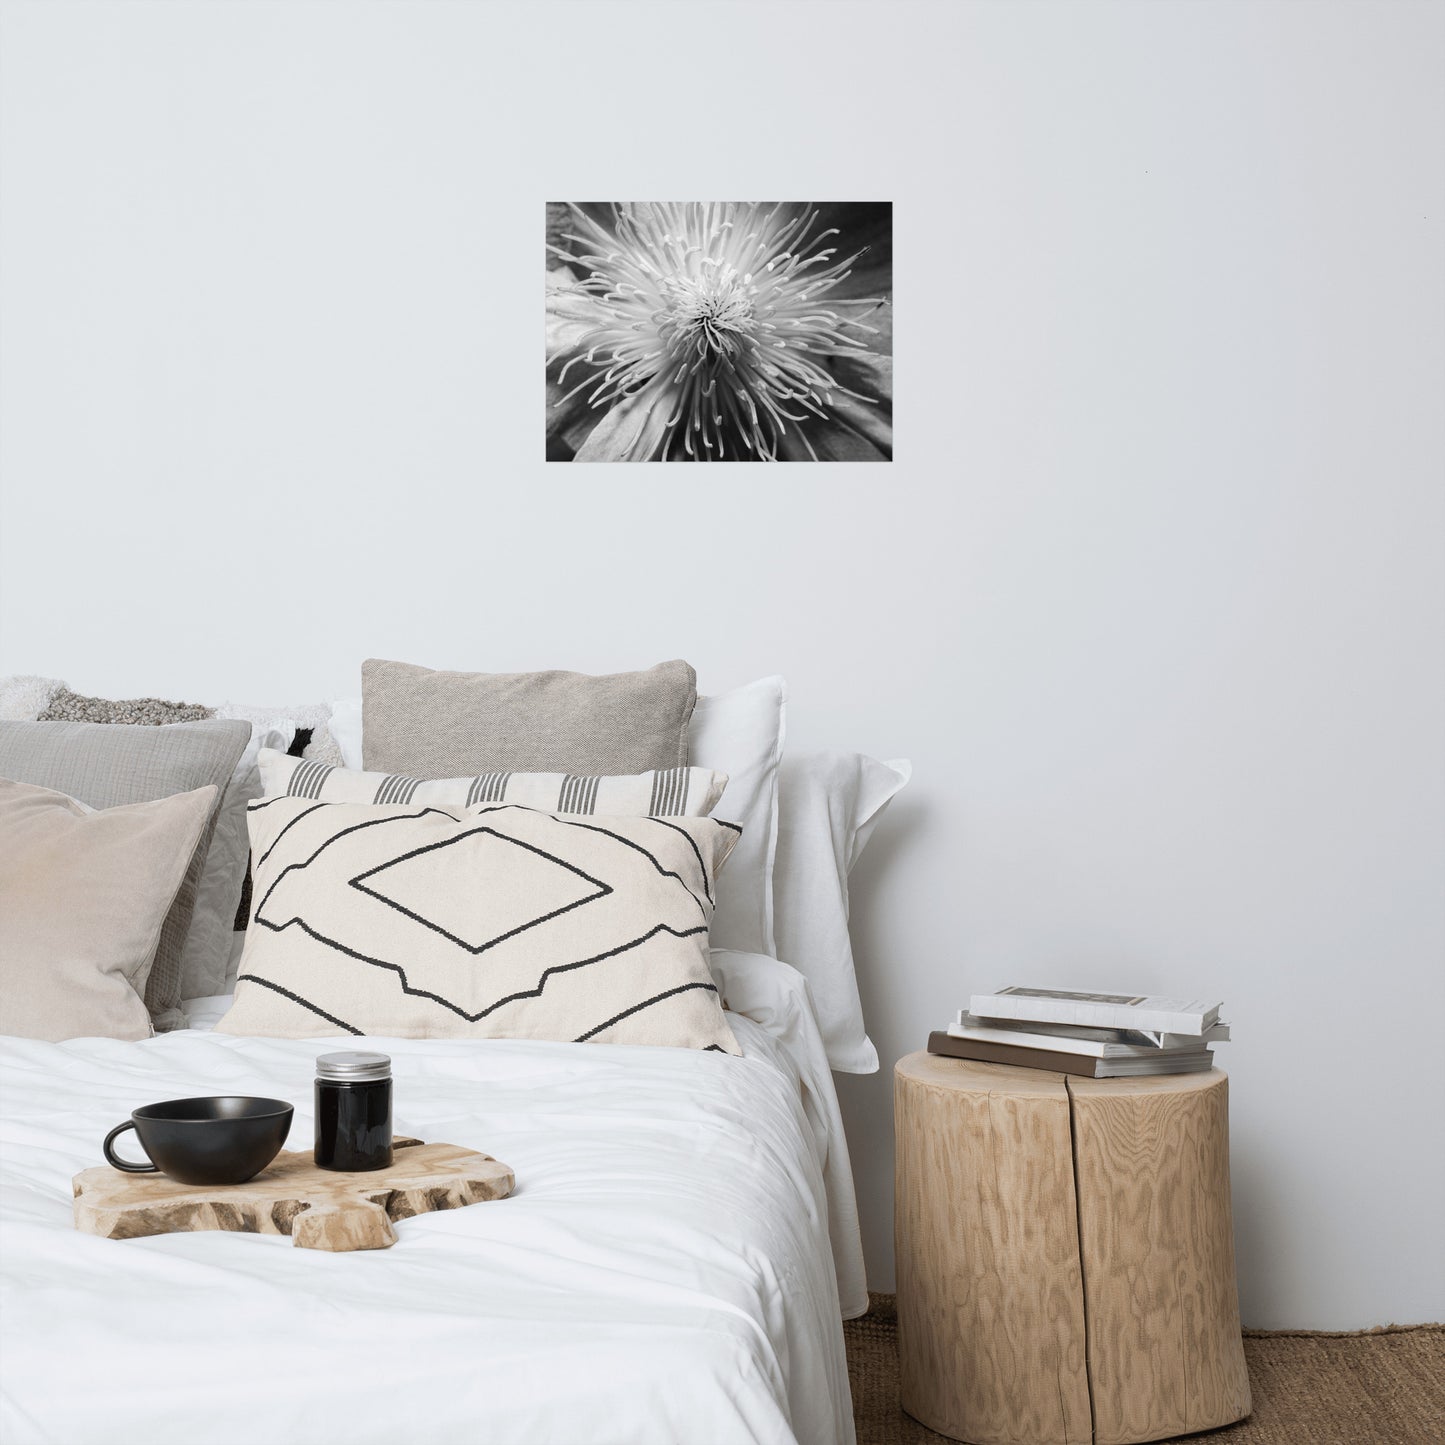 Center of Clematis Floral Nature Photo Loose Unframed Wall Art Prints